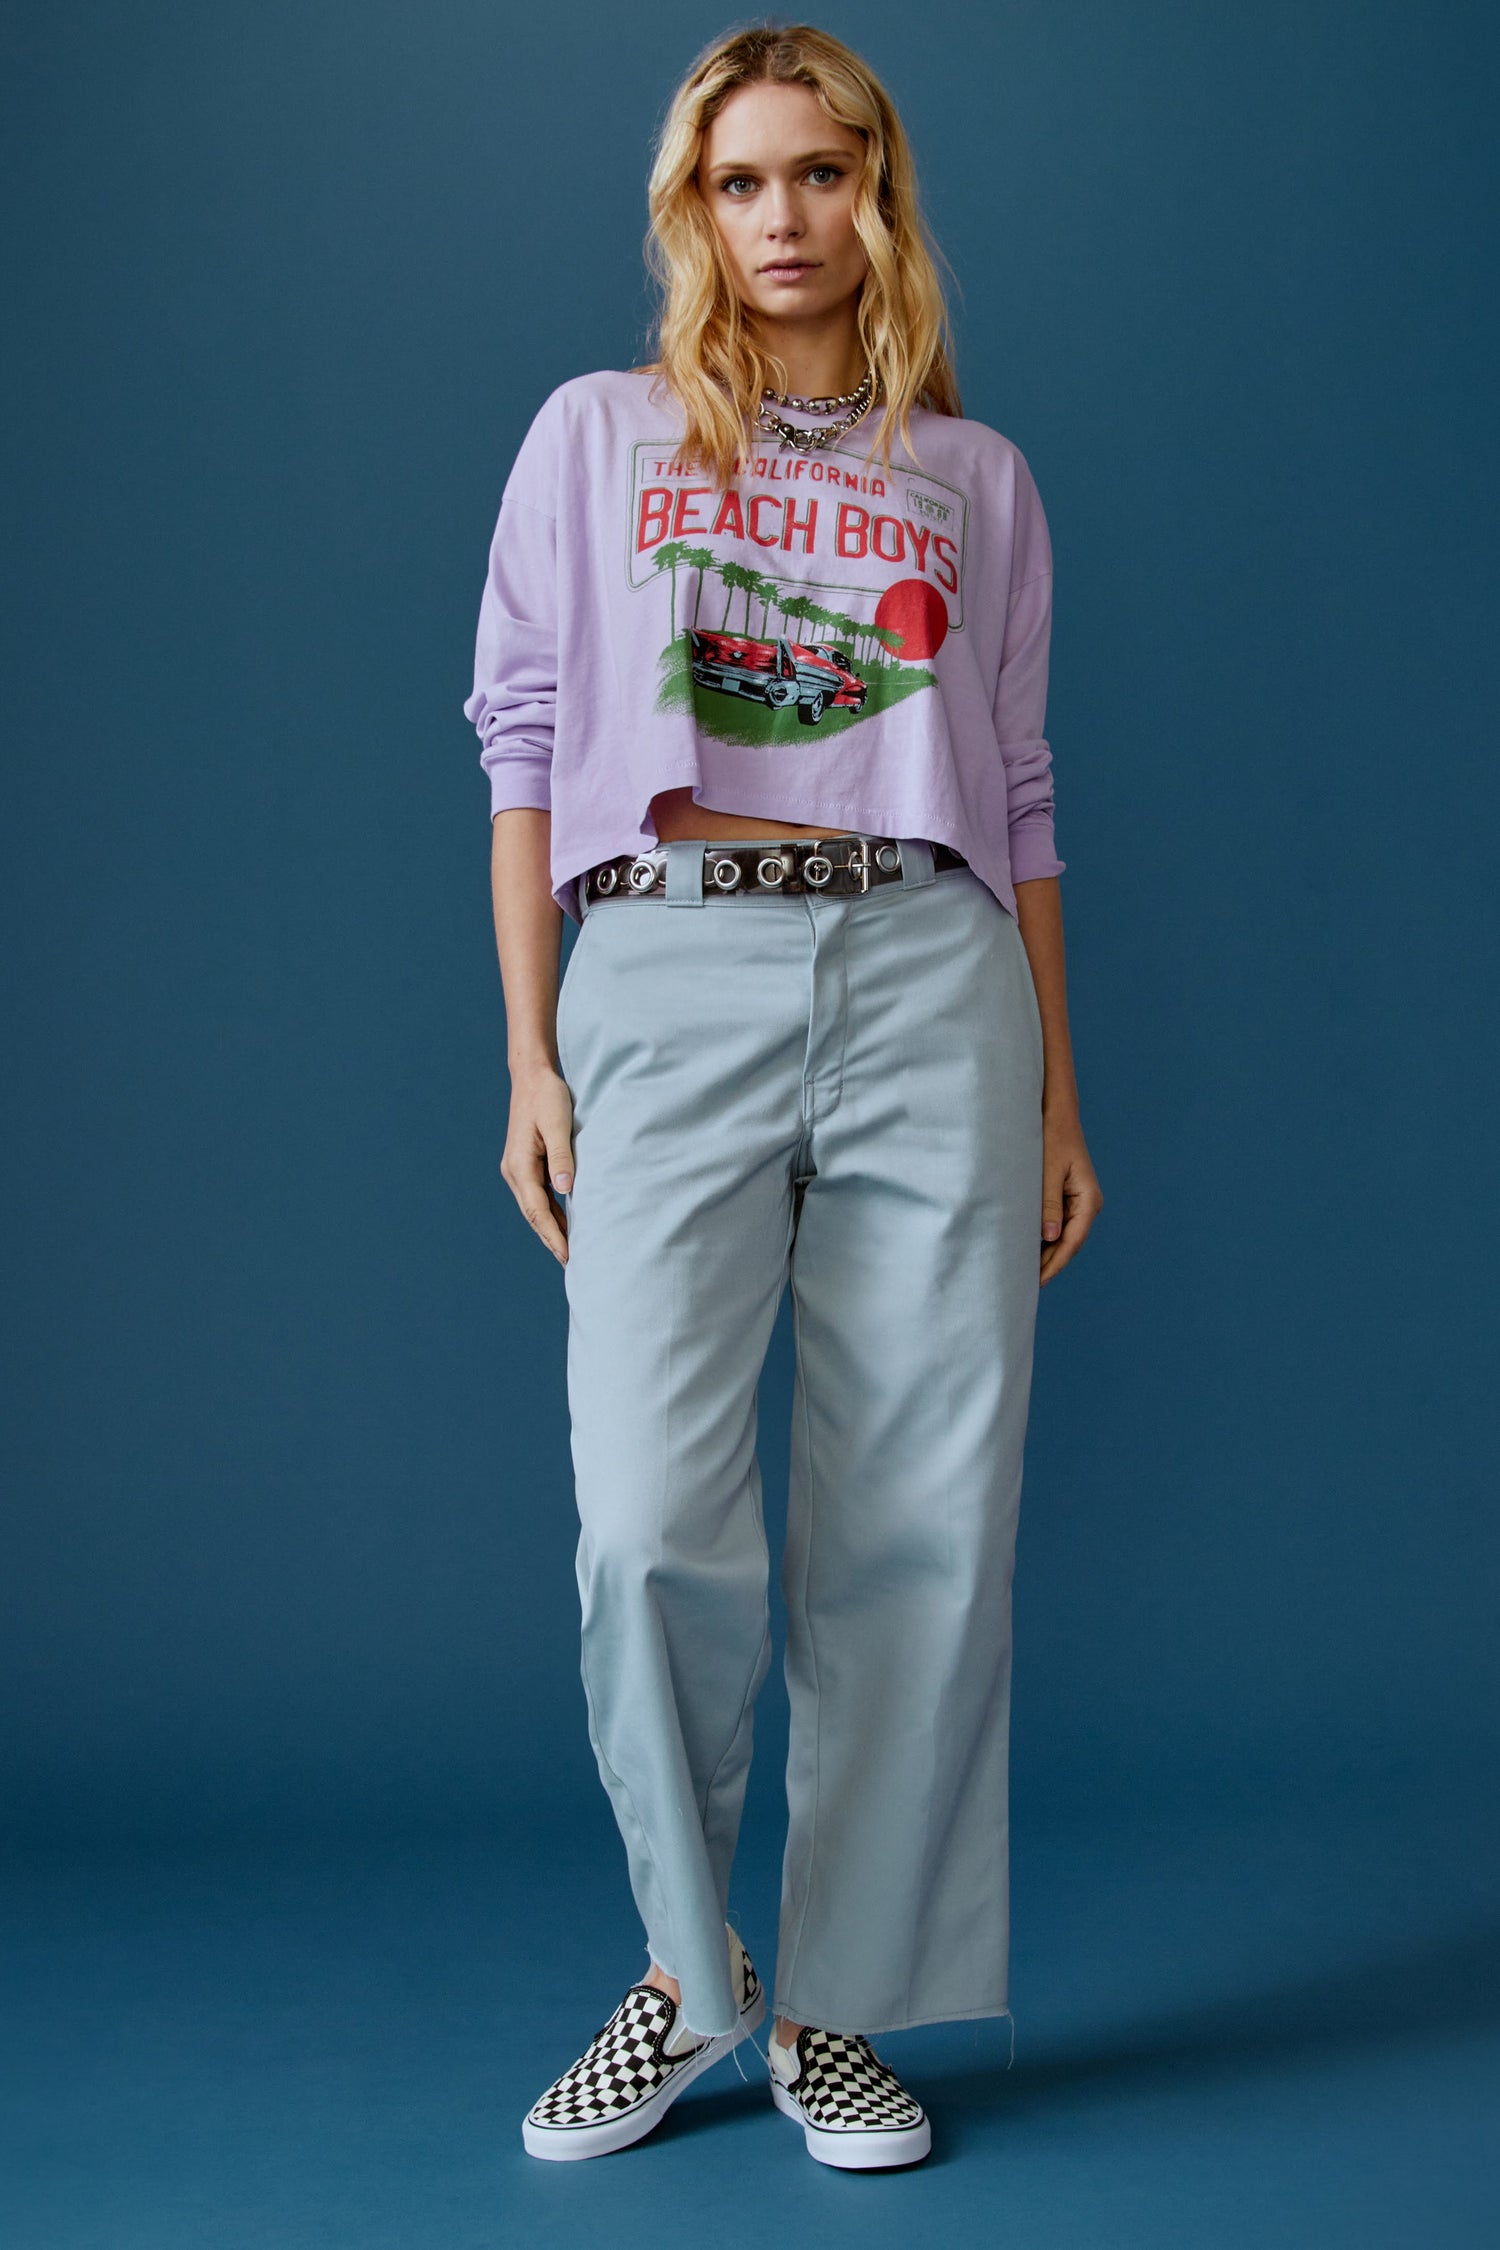 A blonde-haired model featuring a lavender long sleeve stamped with "The Californa Beach Boys" and is desiged with a graphic of trees and cars on the center.